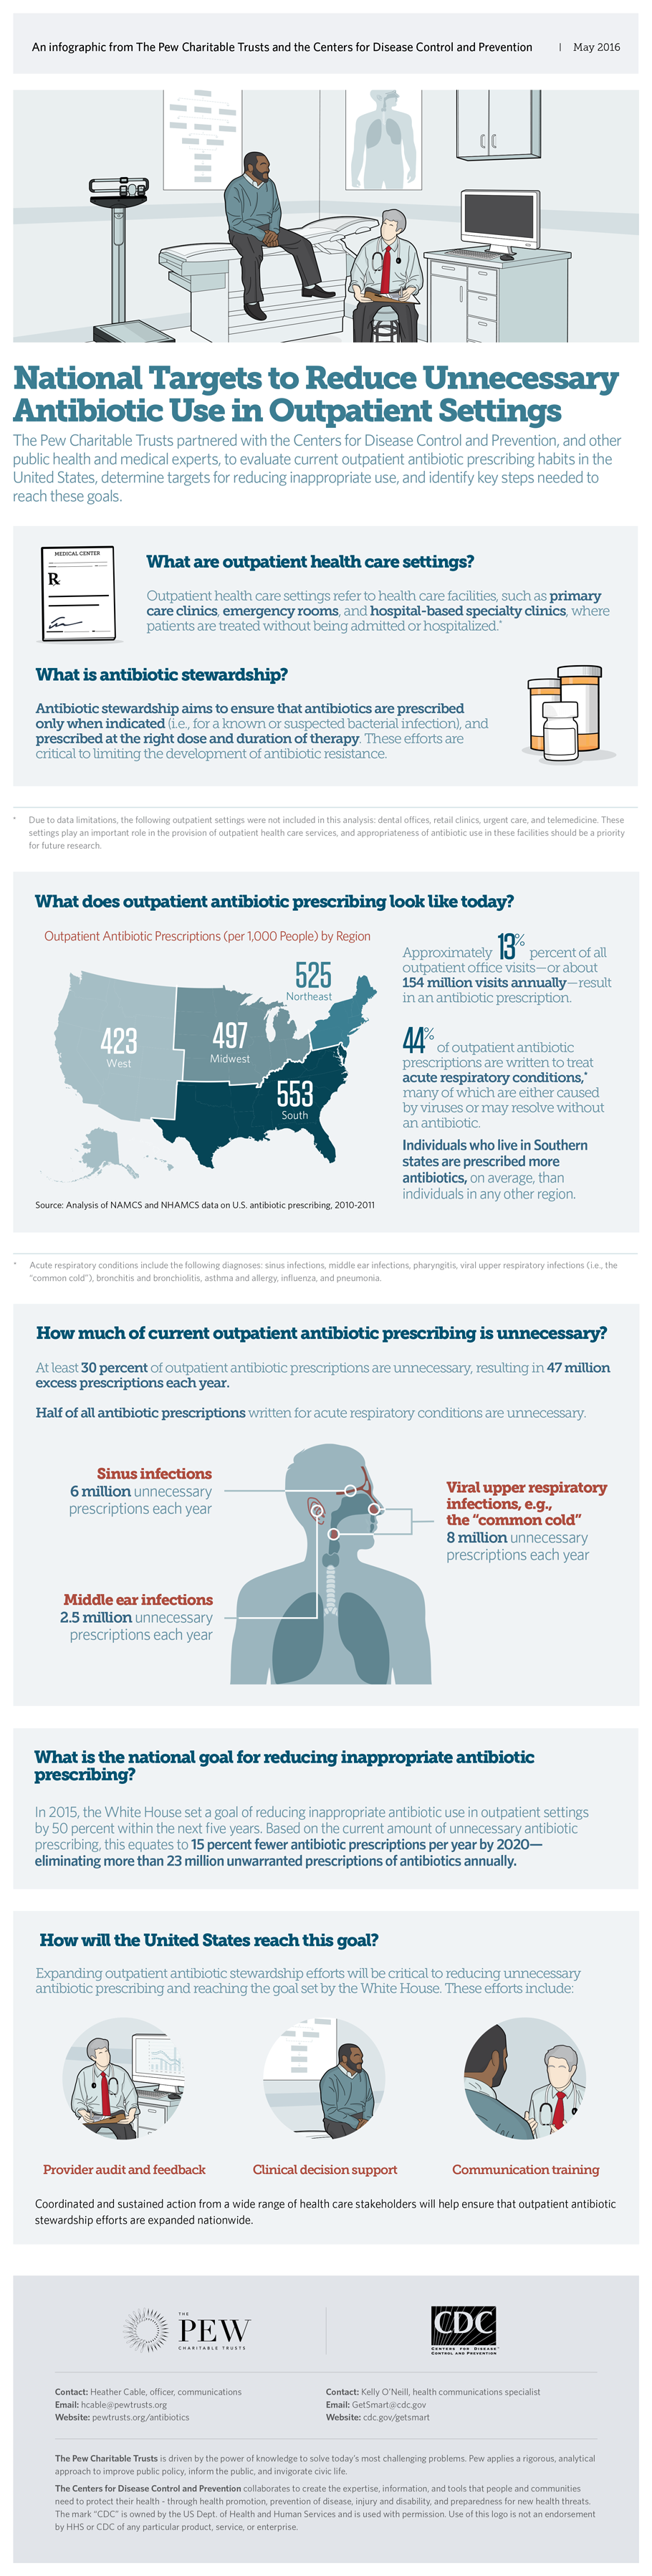 National targets to reduce unnecessary antibiotic use in outpatient settings: Infographic